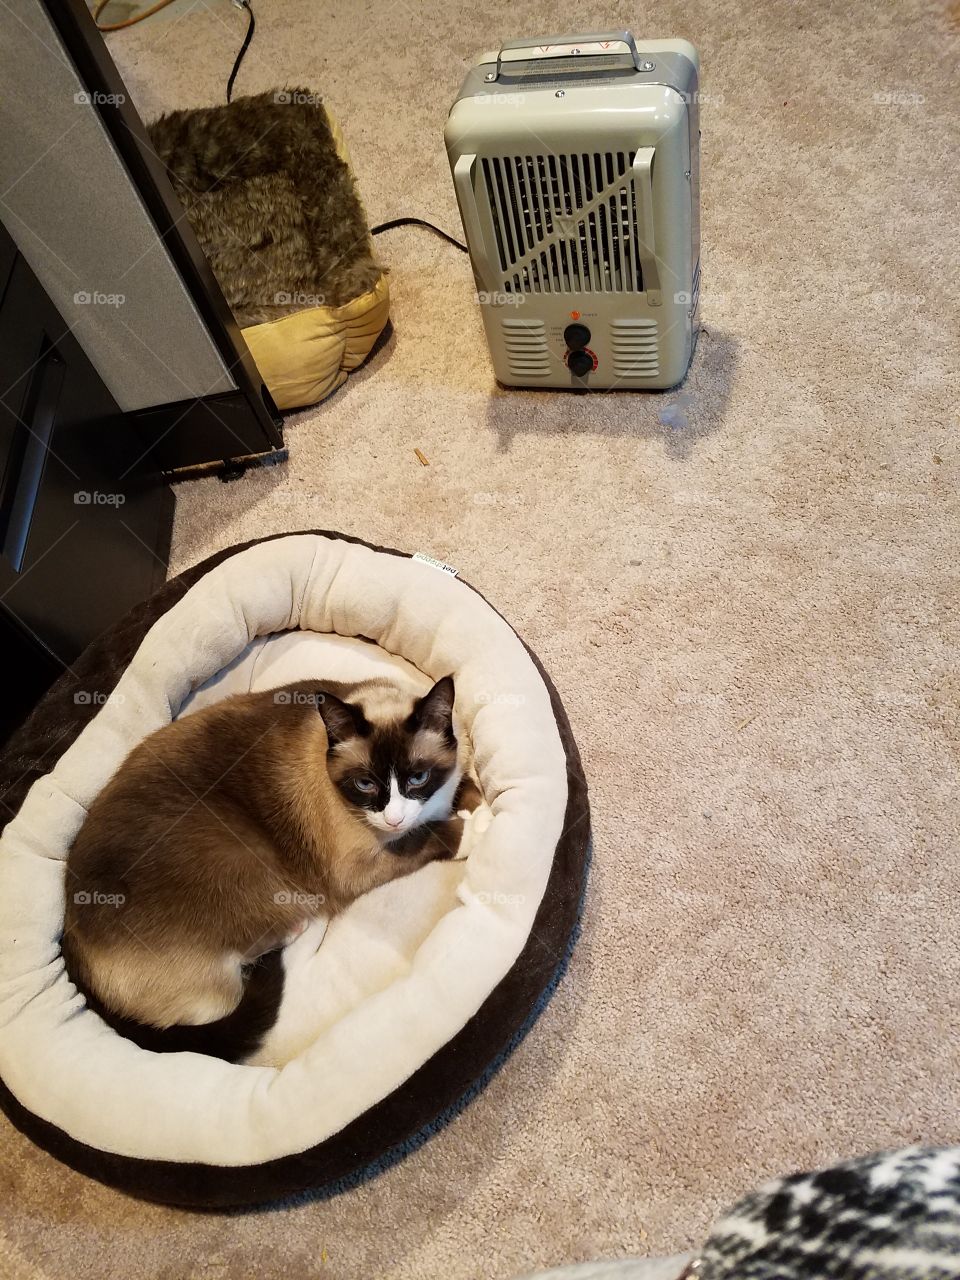 keeping warm by the heater